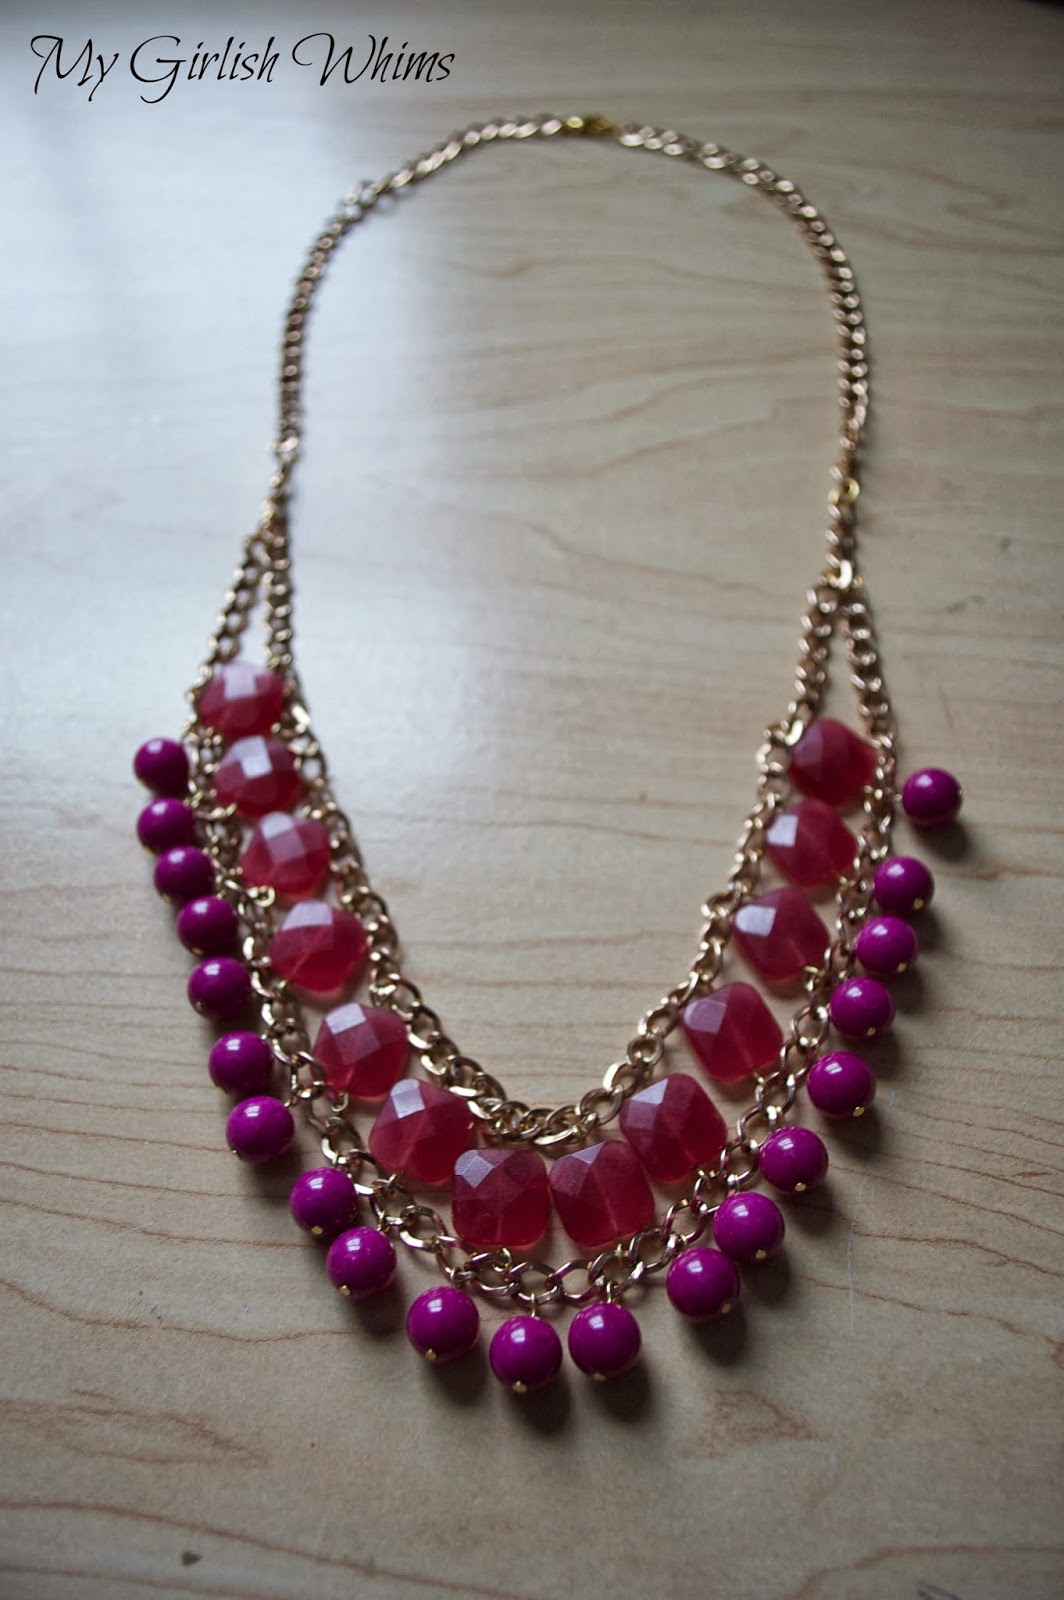 Valentines Day Necklace - My Girlish Whims